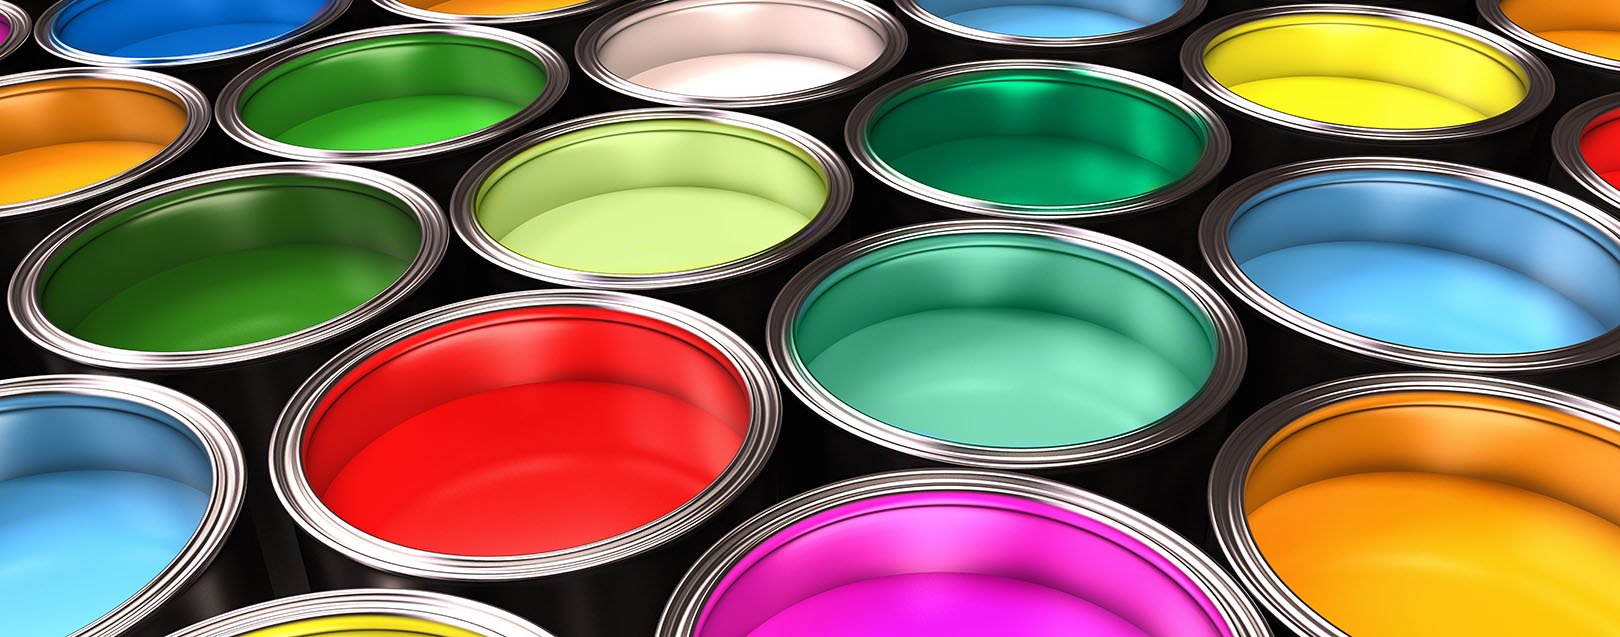 Berger Paints to invest Rs 100 cr in Jejuri plant